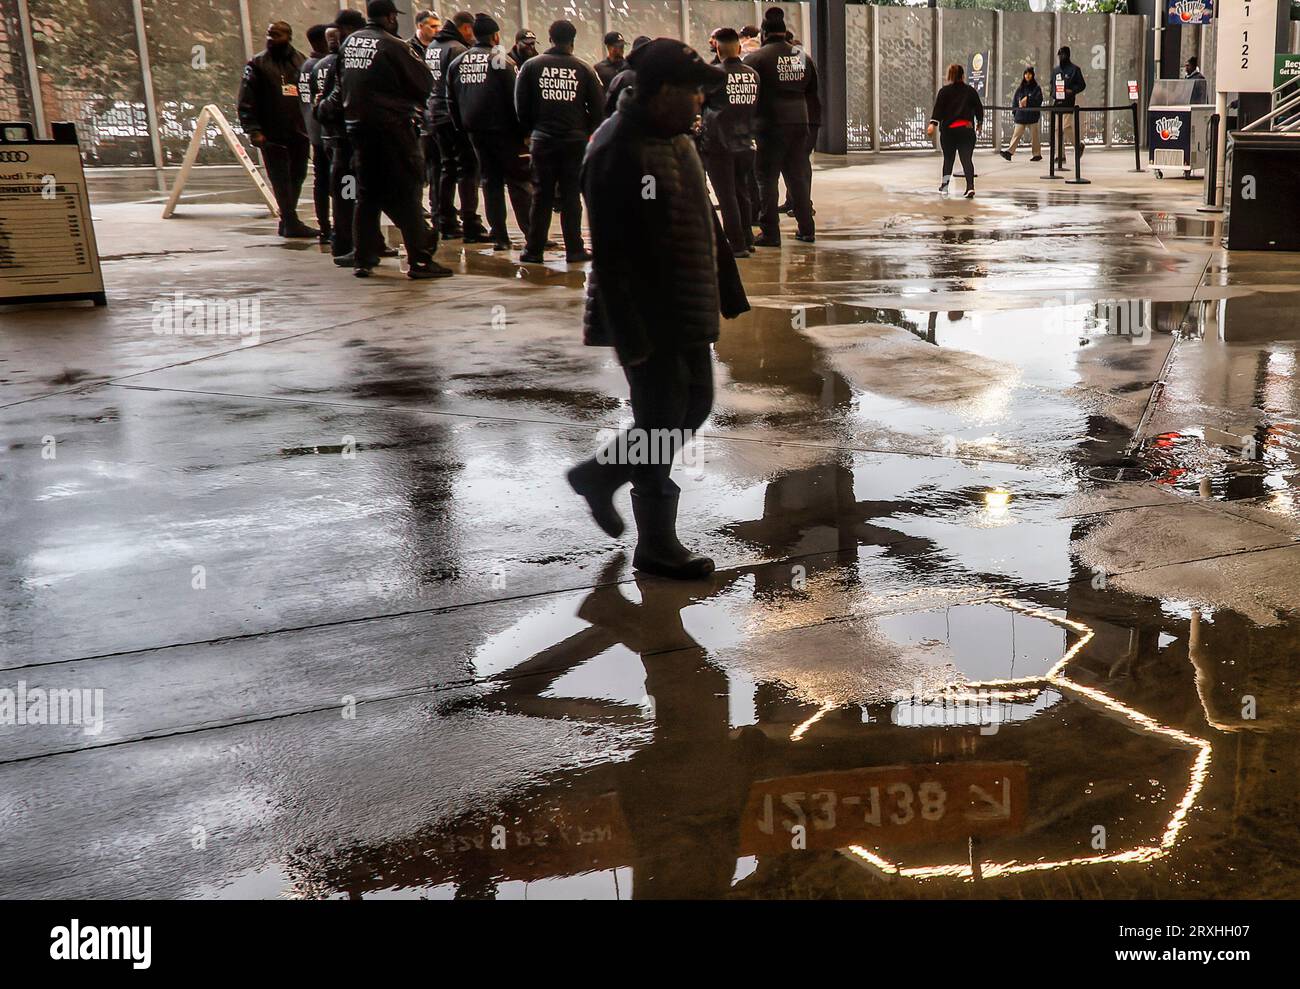 Security personnel gather in a wet stadium before a game Stock Photo